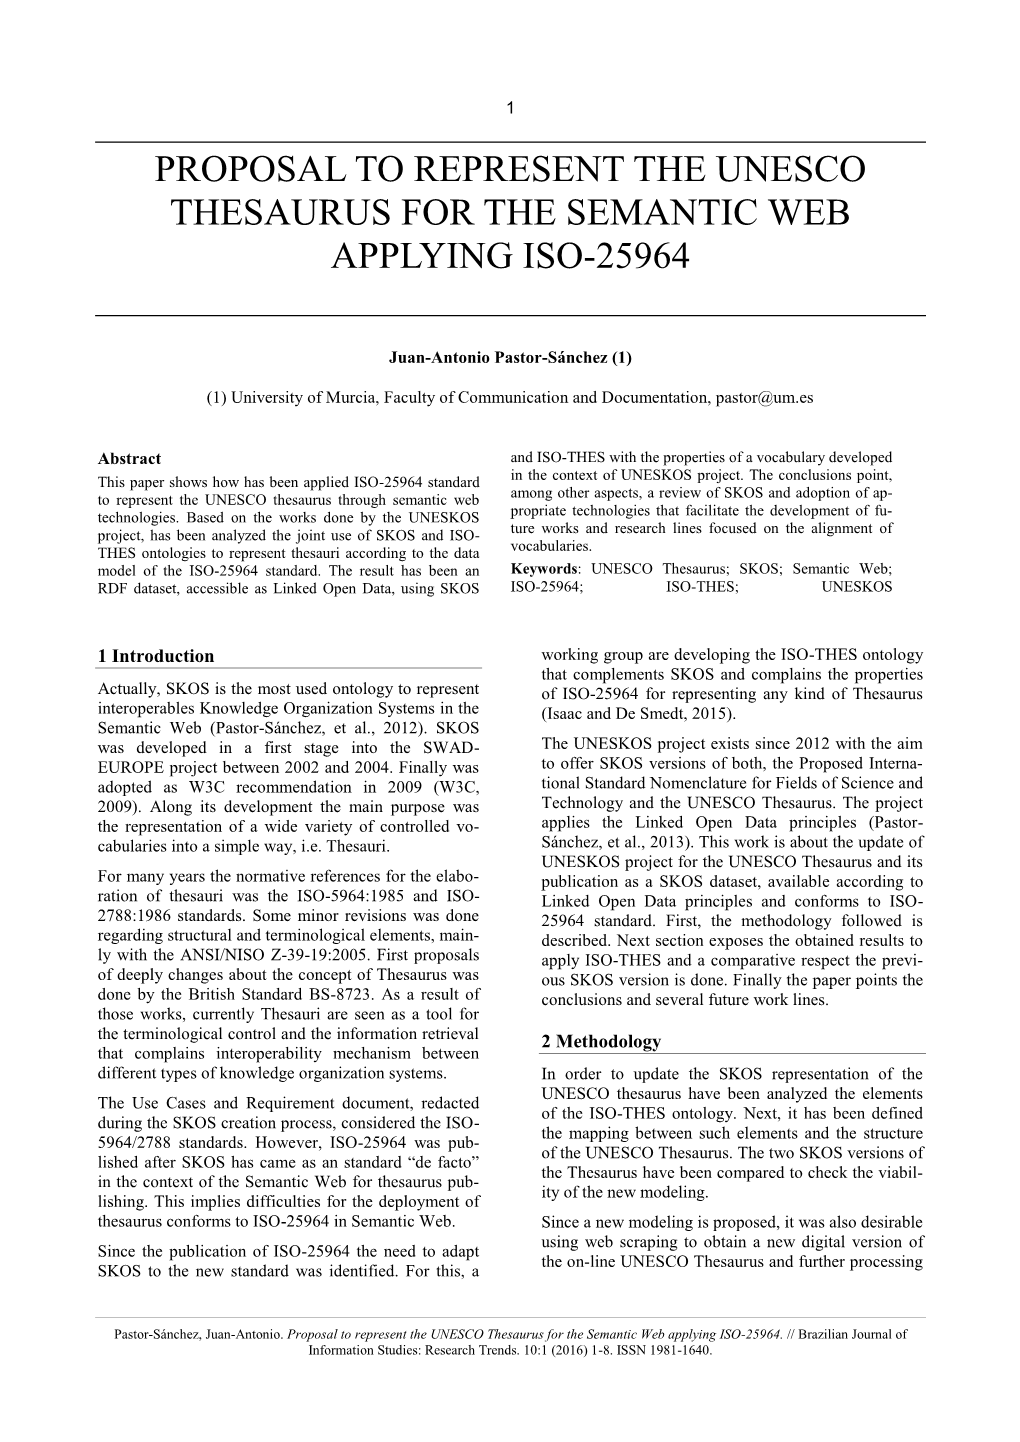 Proposal to Represent the Unesco Thesaurus for the Semantic Web Applying Iso-25964